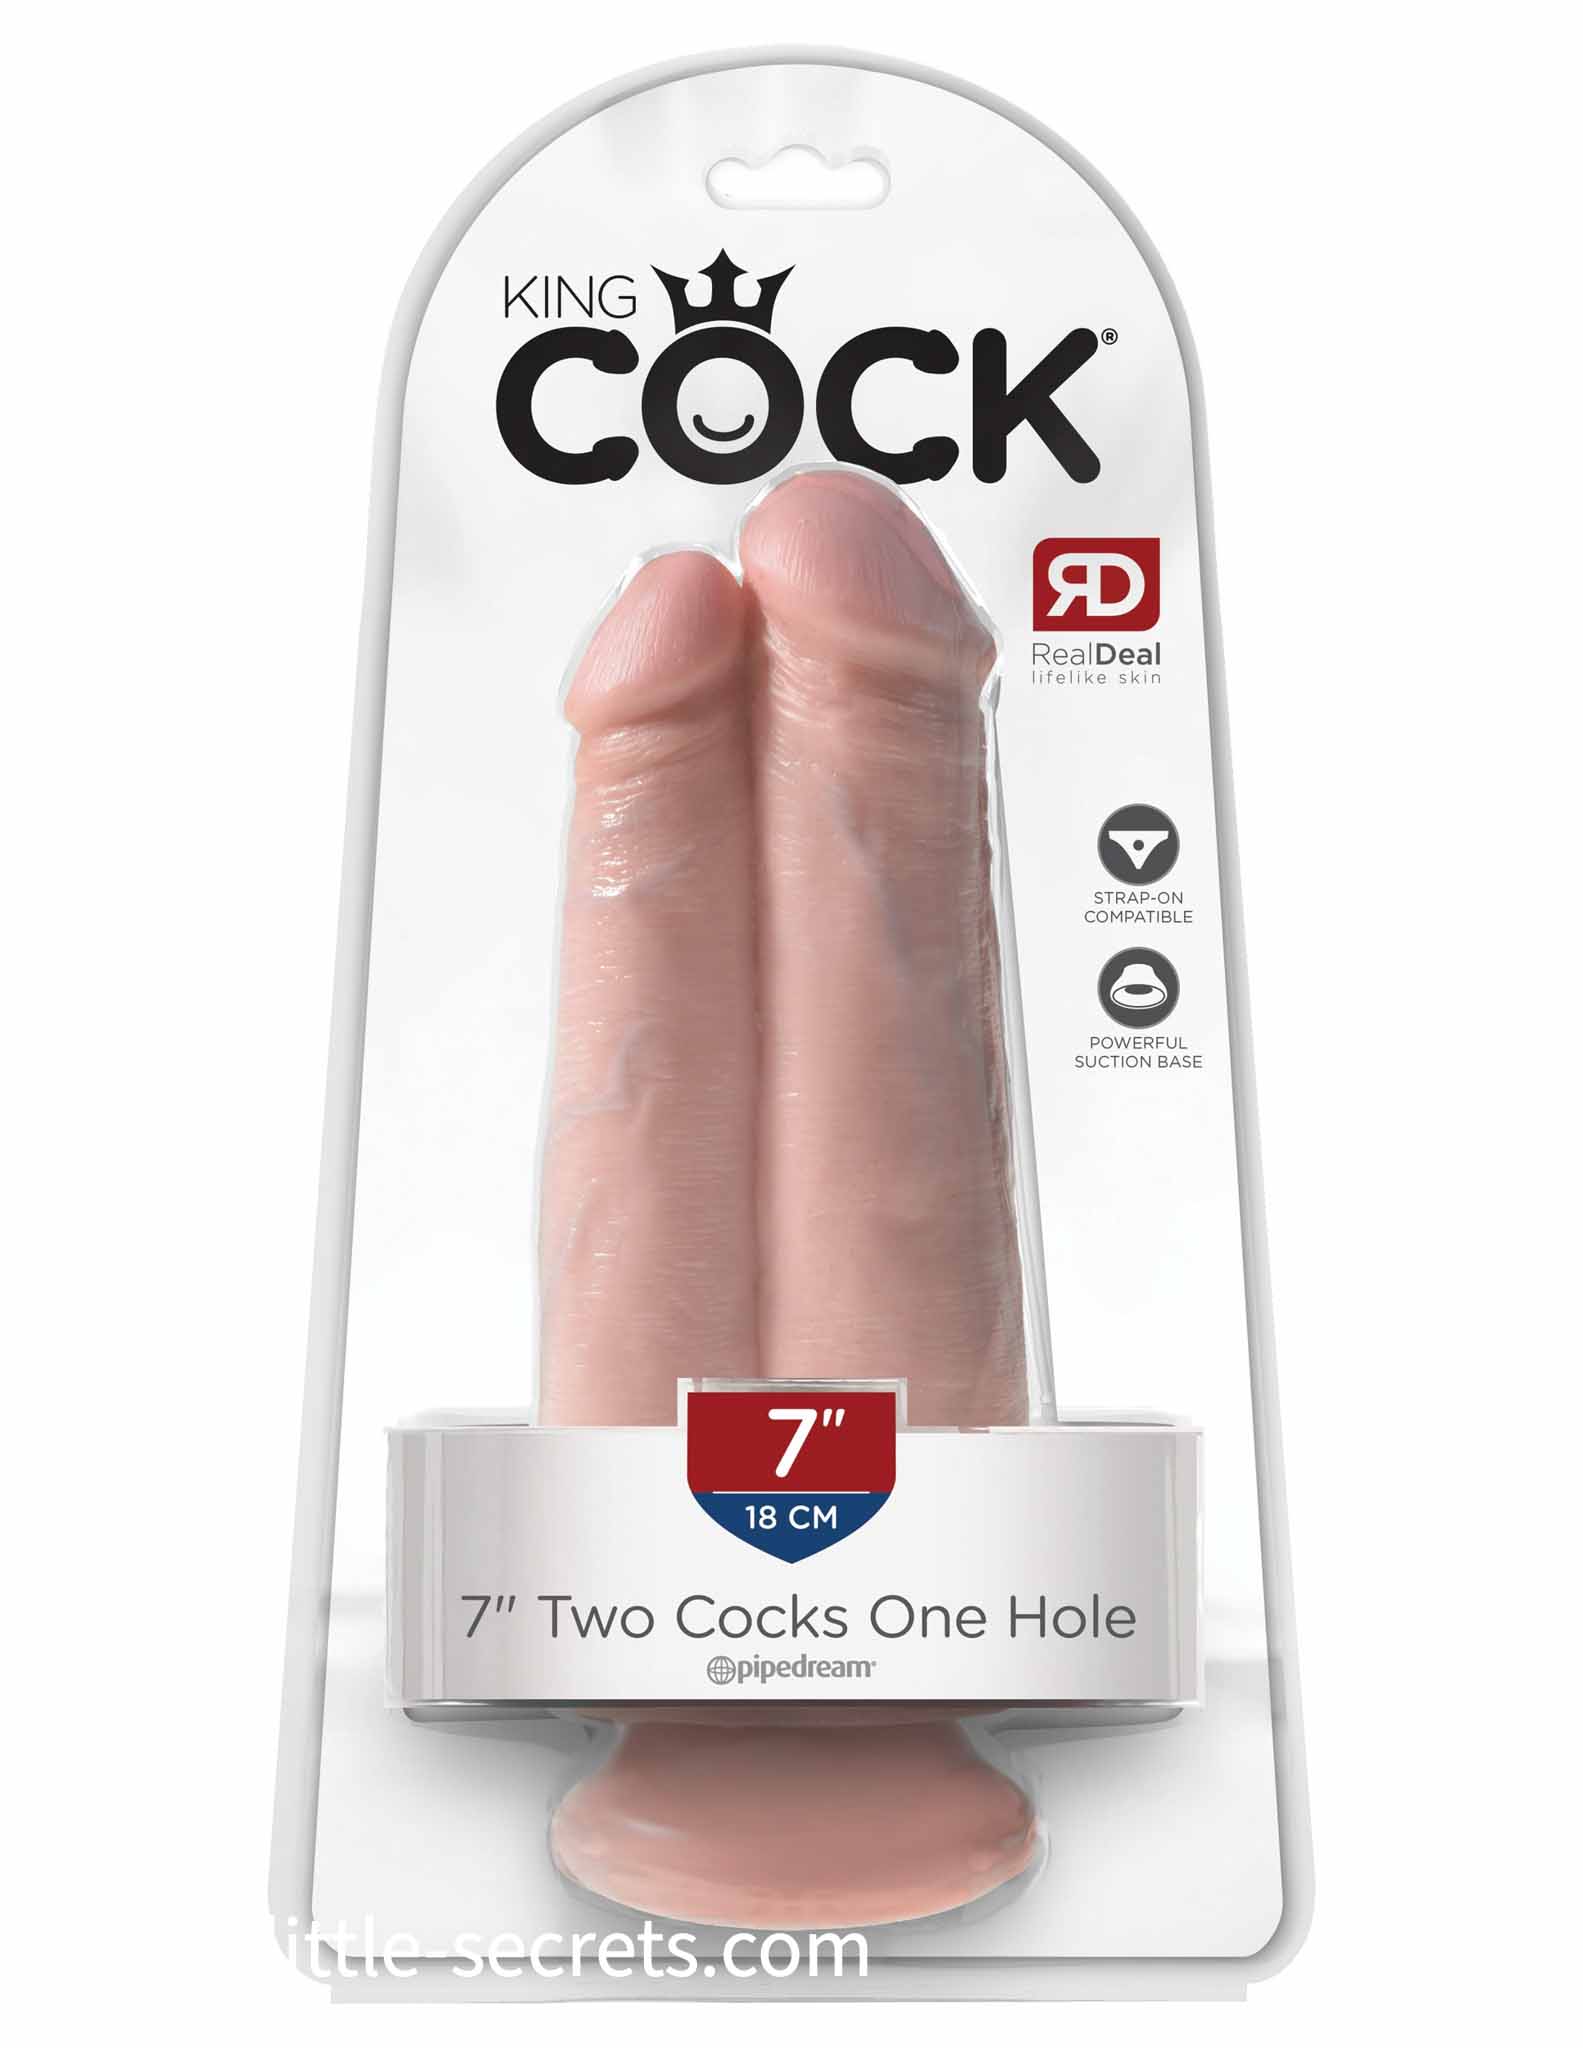 King Cock 7 Inch Two Cocks One Hole